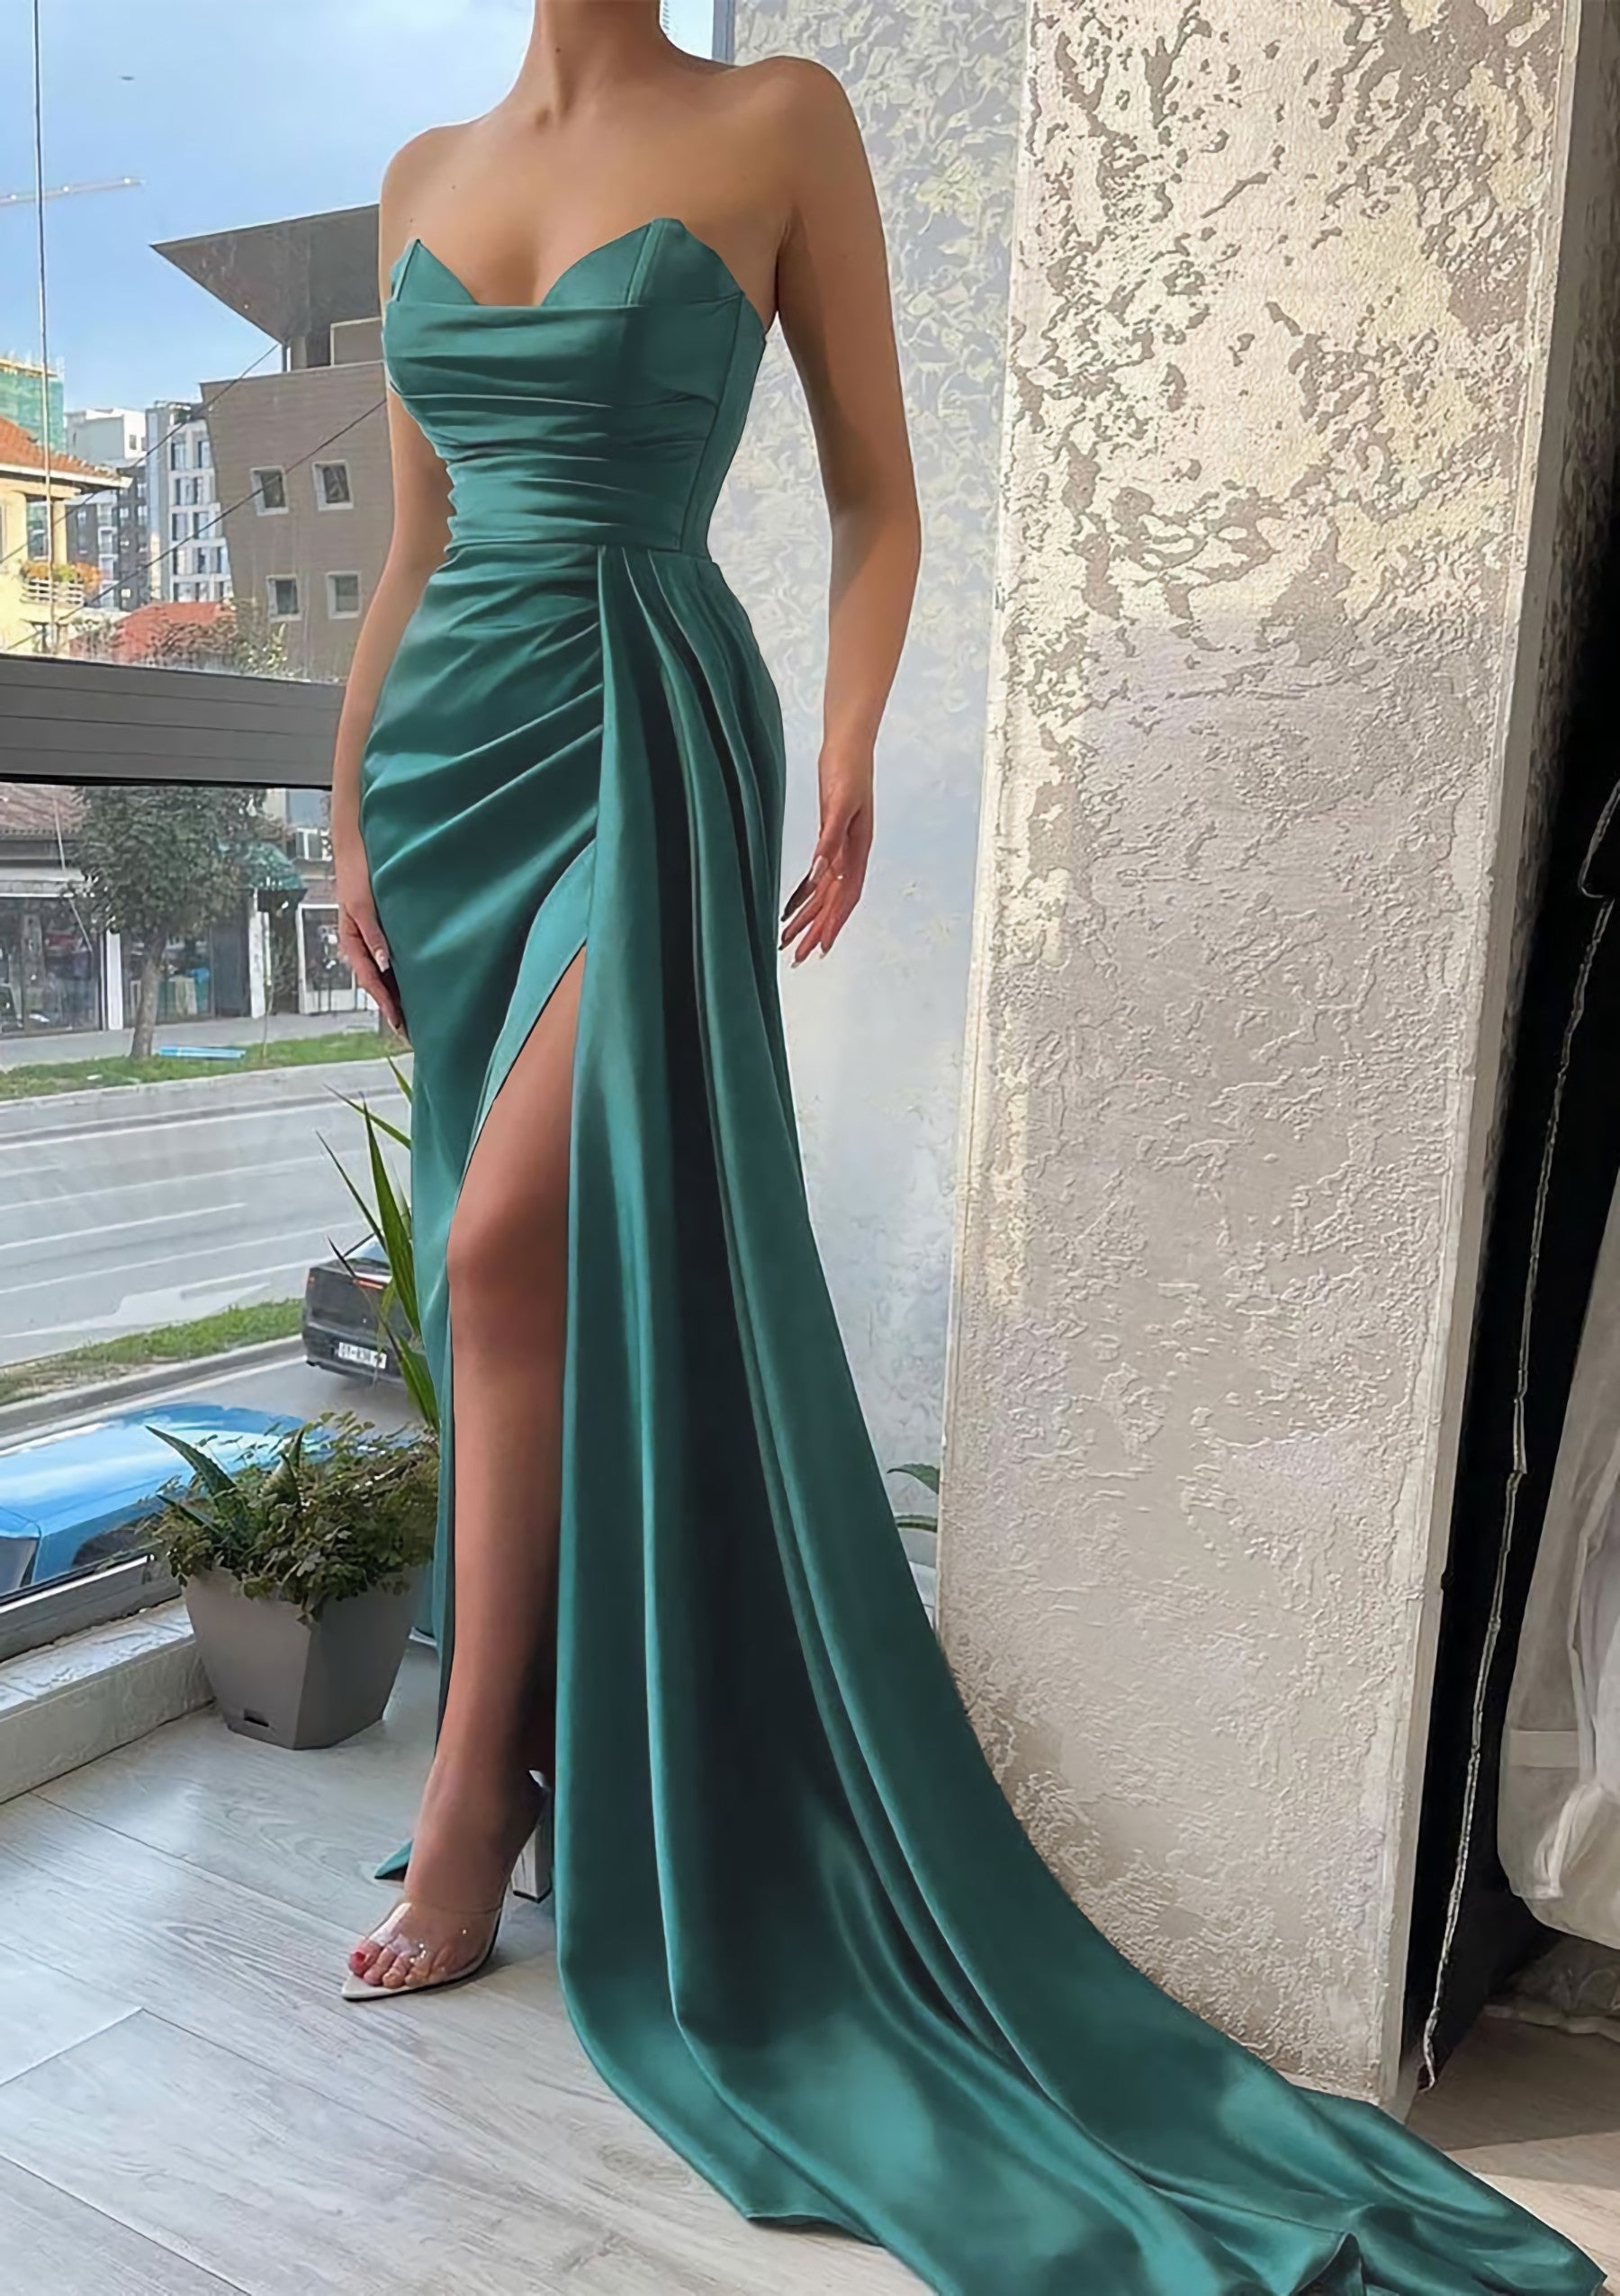 Trumpet/Mermaid Sweetheart Strapless Court Train Satin Corset Prom Dress With Pleated Split outfit, Prom Dresses Sleeve